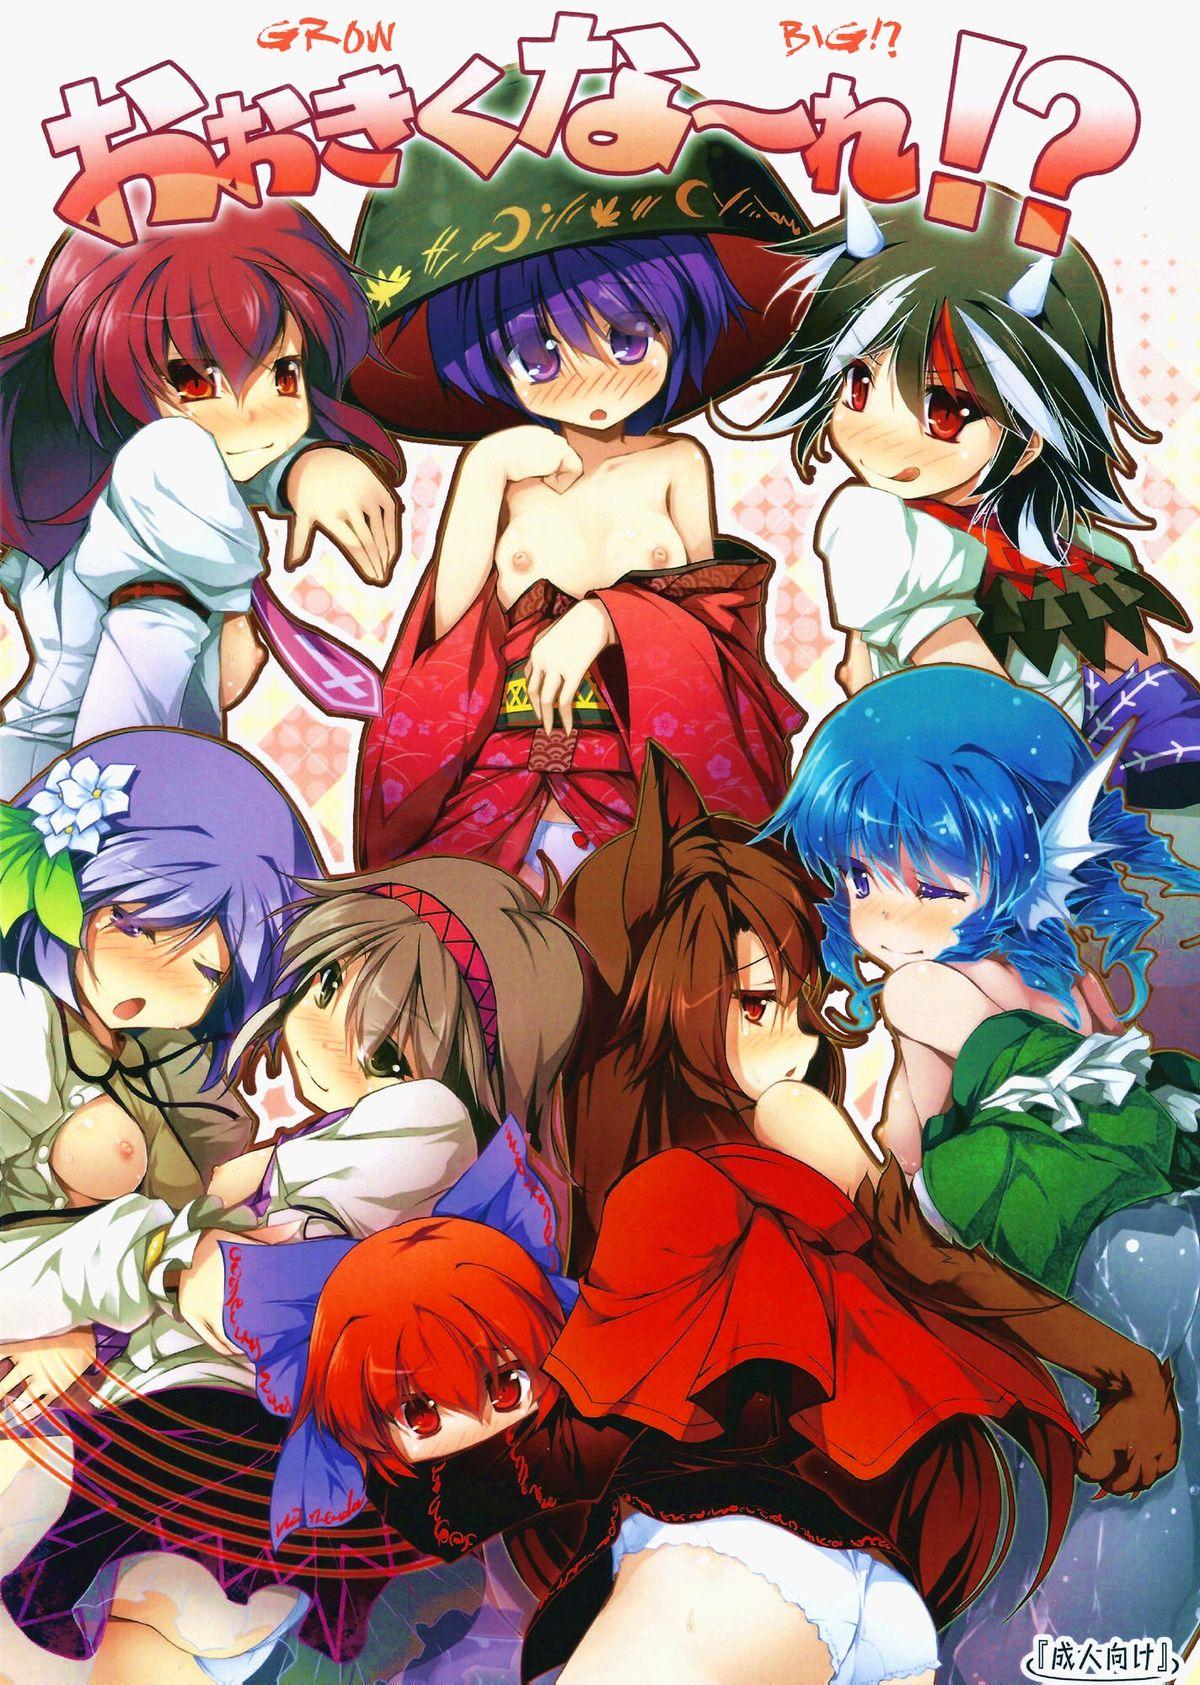 Hot Ookikuna ~ Re!? | Grow Big?! - Touhou project Cock - Picture 1